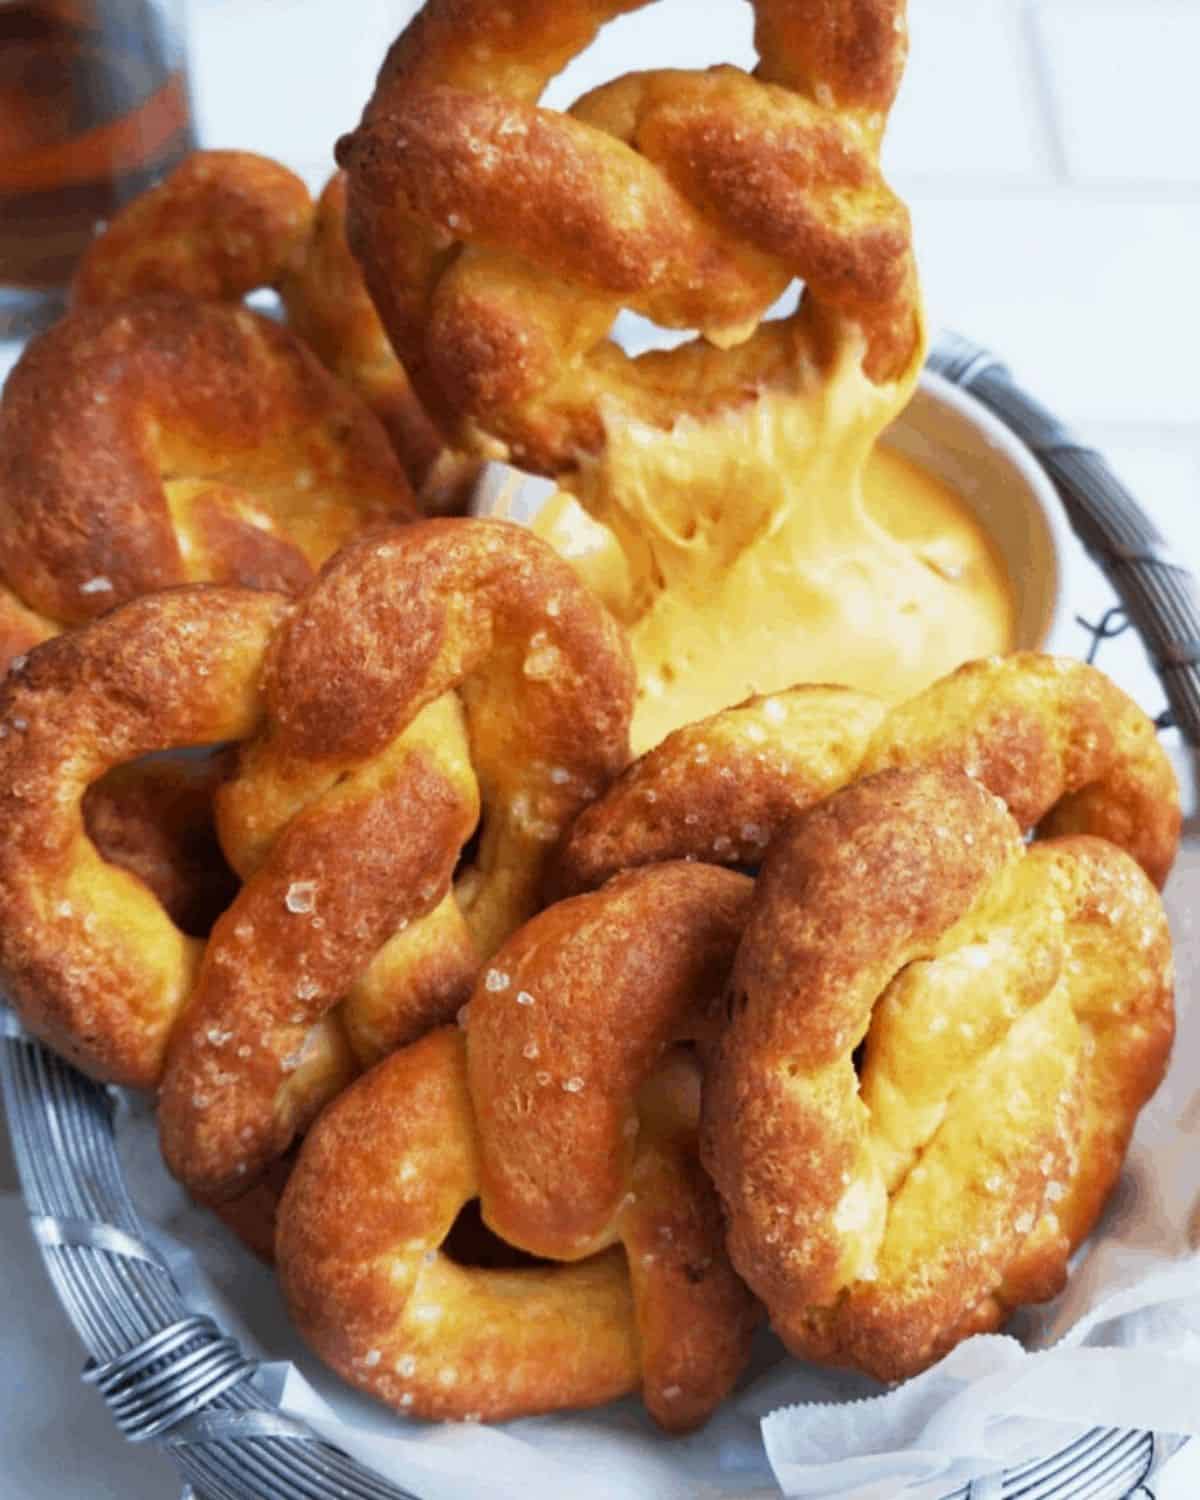 Six keto pretzels in a wire basket with one pretzel being dipped into cheese sauce